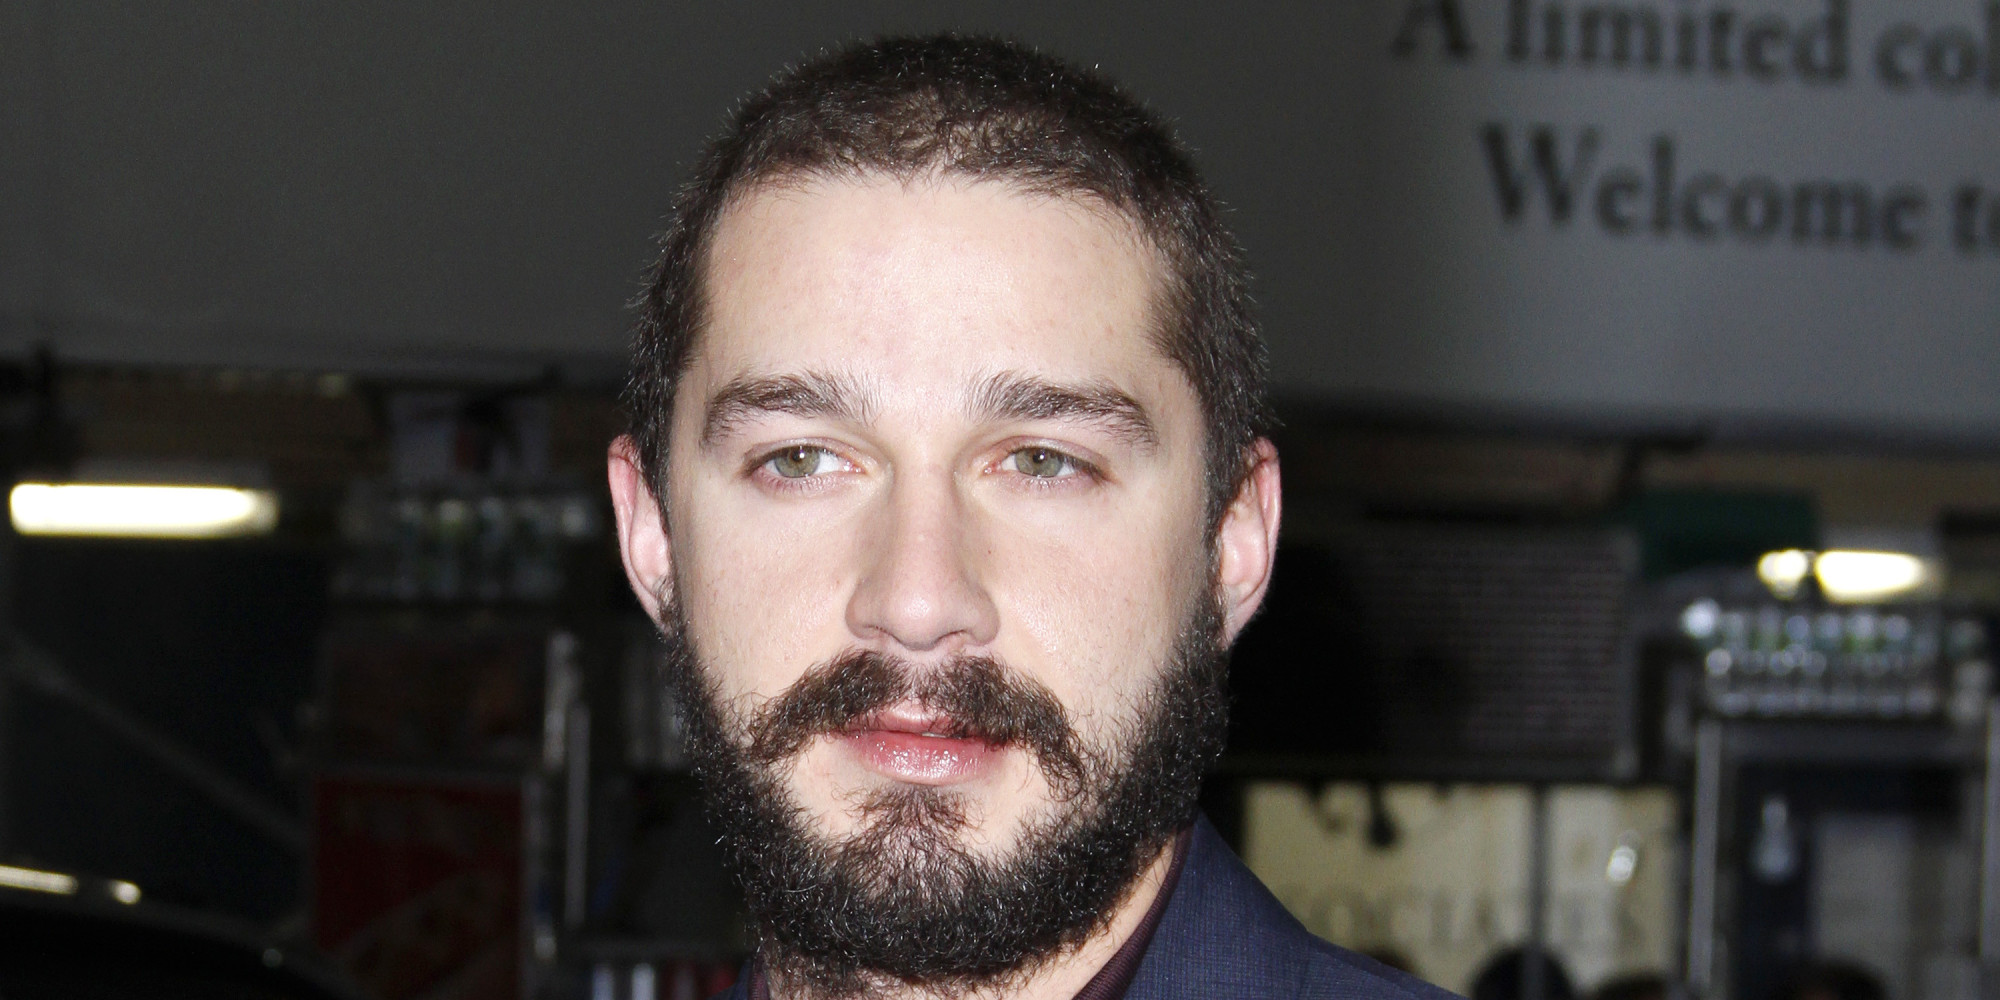 A Definitive Guide To The Decline Of Shia LaBeouf [UPDATED] | HuffPost2000 x 1000